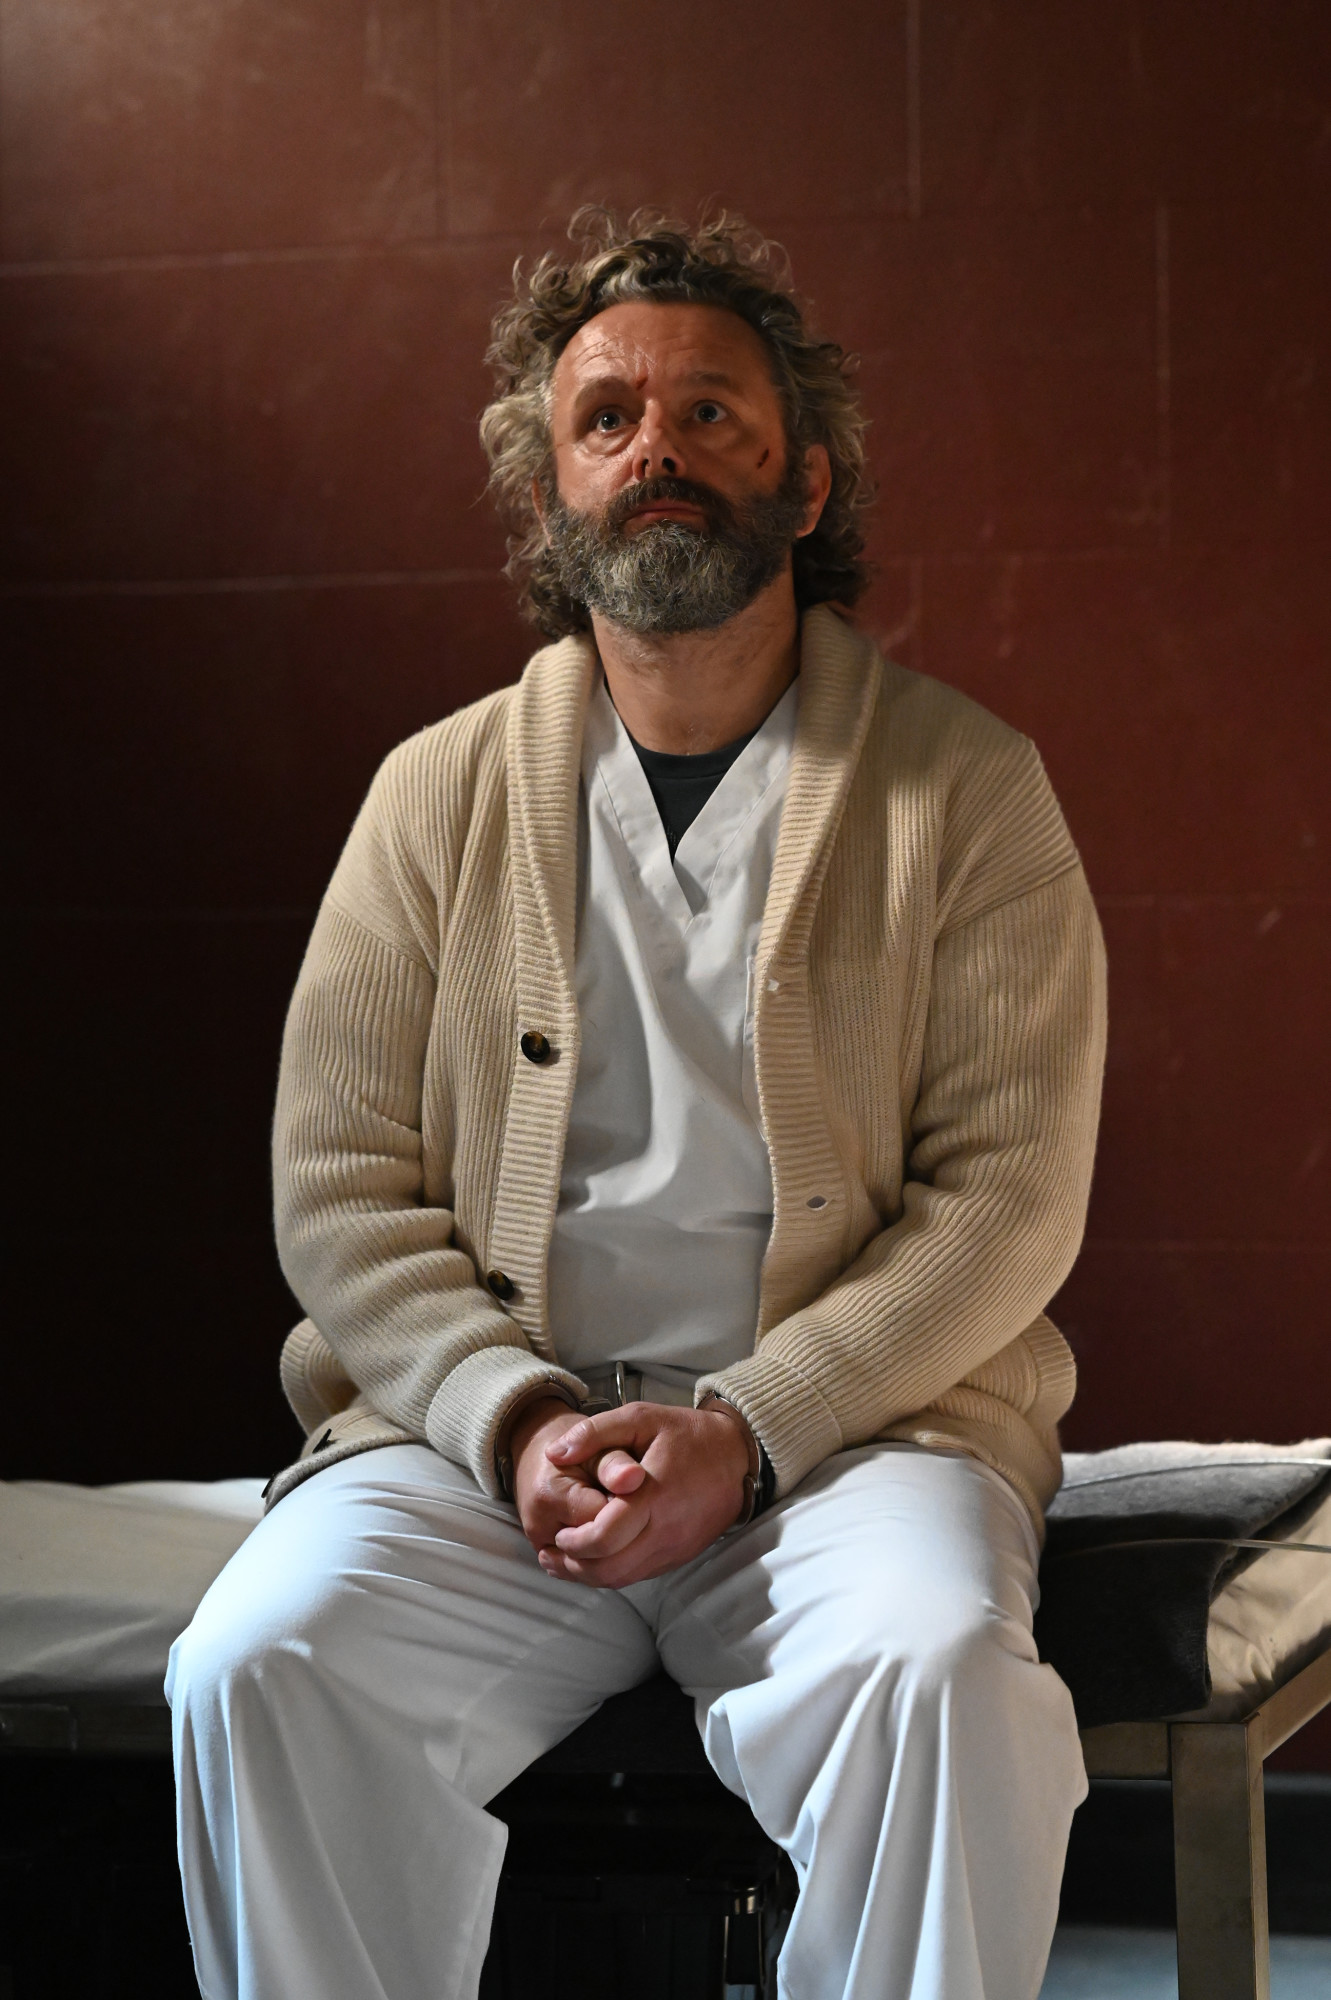 PRODIGAL SON: Michael Sheen in the "It's All In The Execution" season two premiere episode of PRODIGAL SON airing Tuesday, Jan. 12 (9:01-10:00 PM ET/PT) on FOX. ©2020 Fox Media LLC Cr: Phil Caruso/FOX